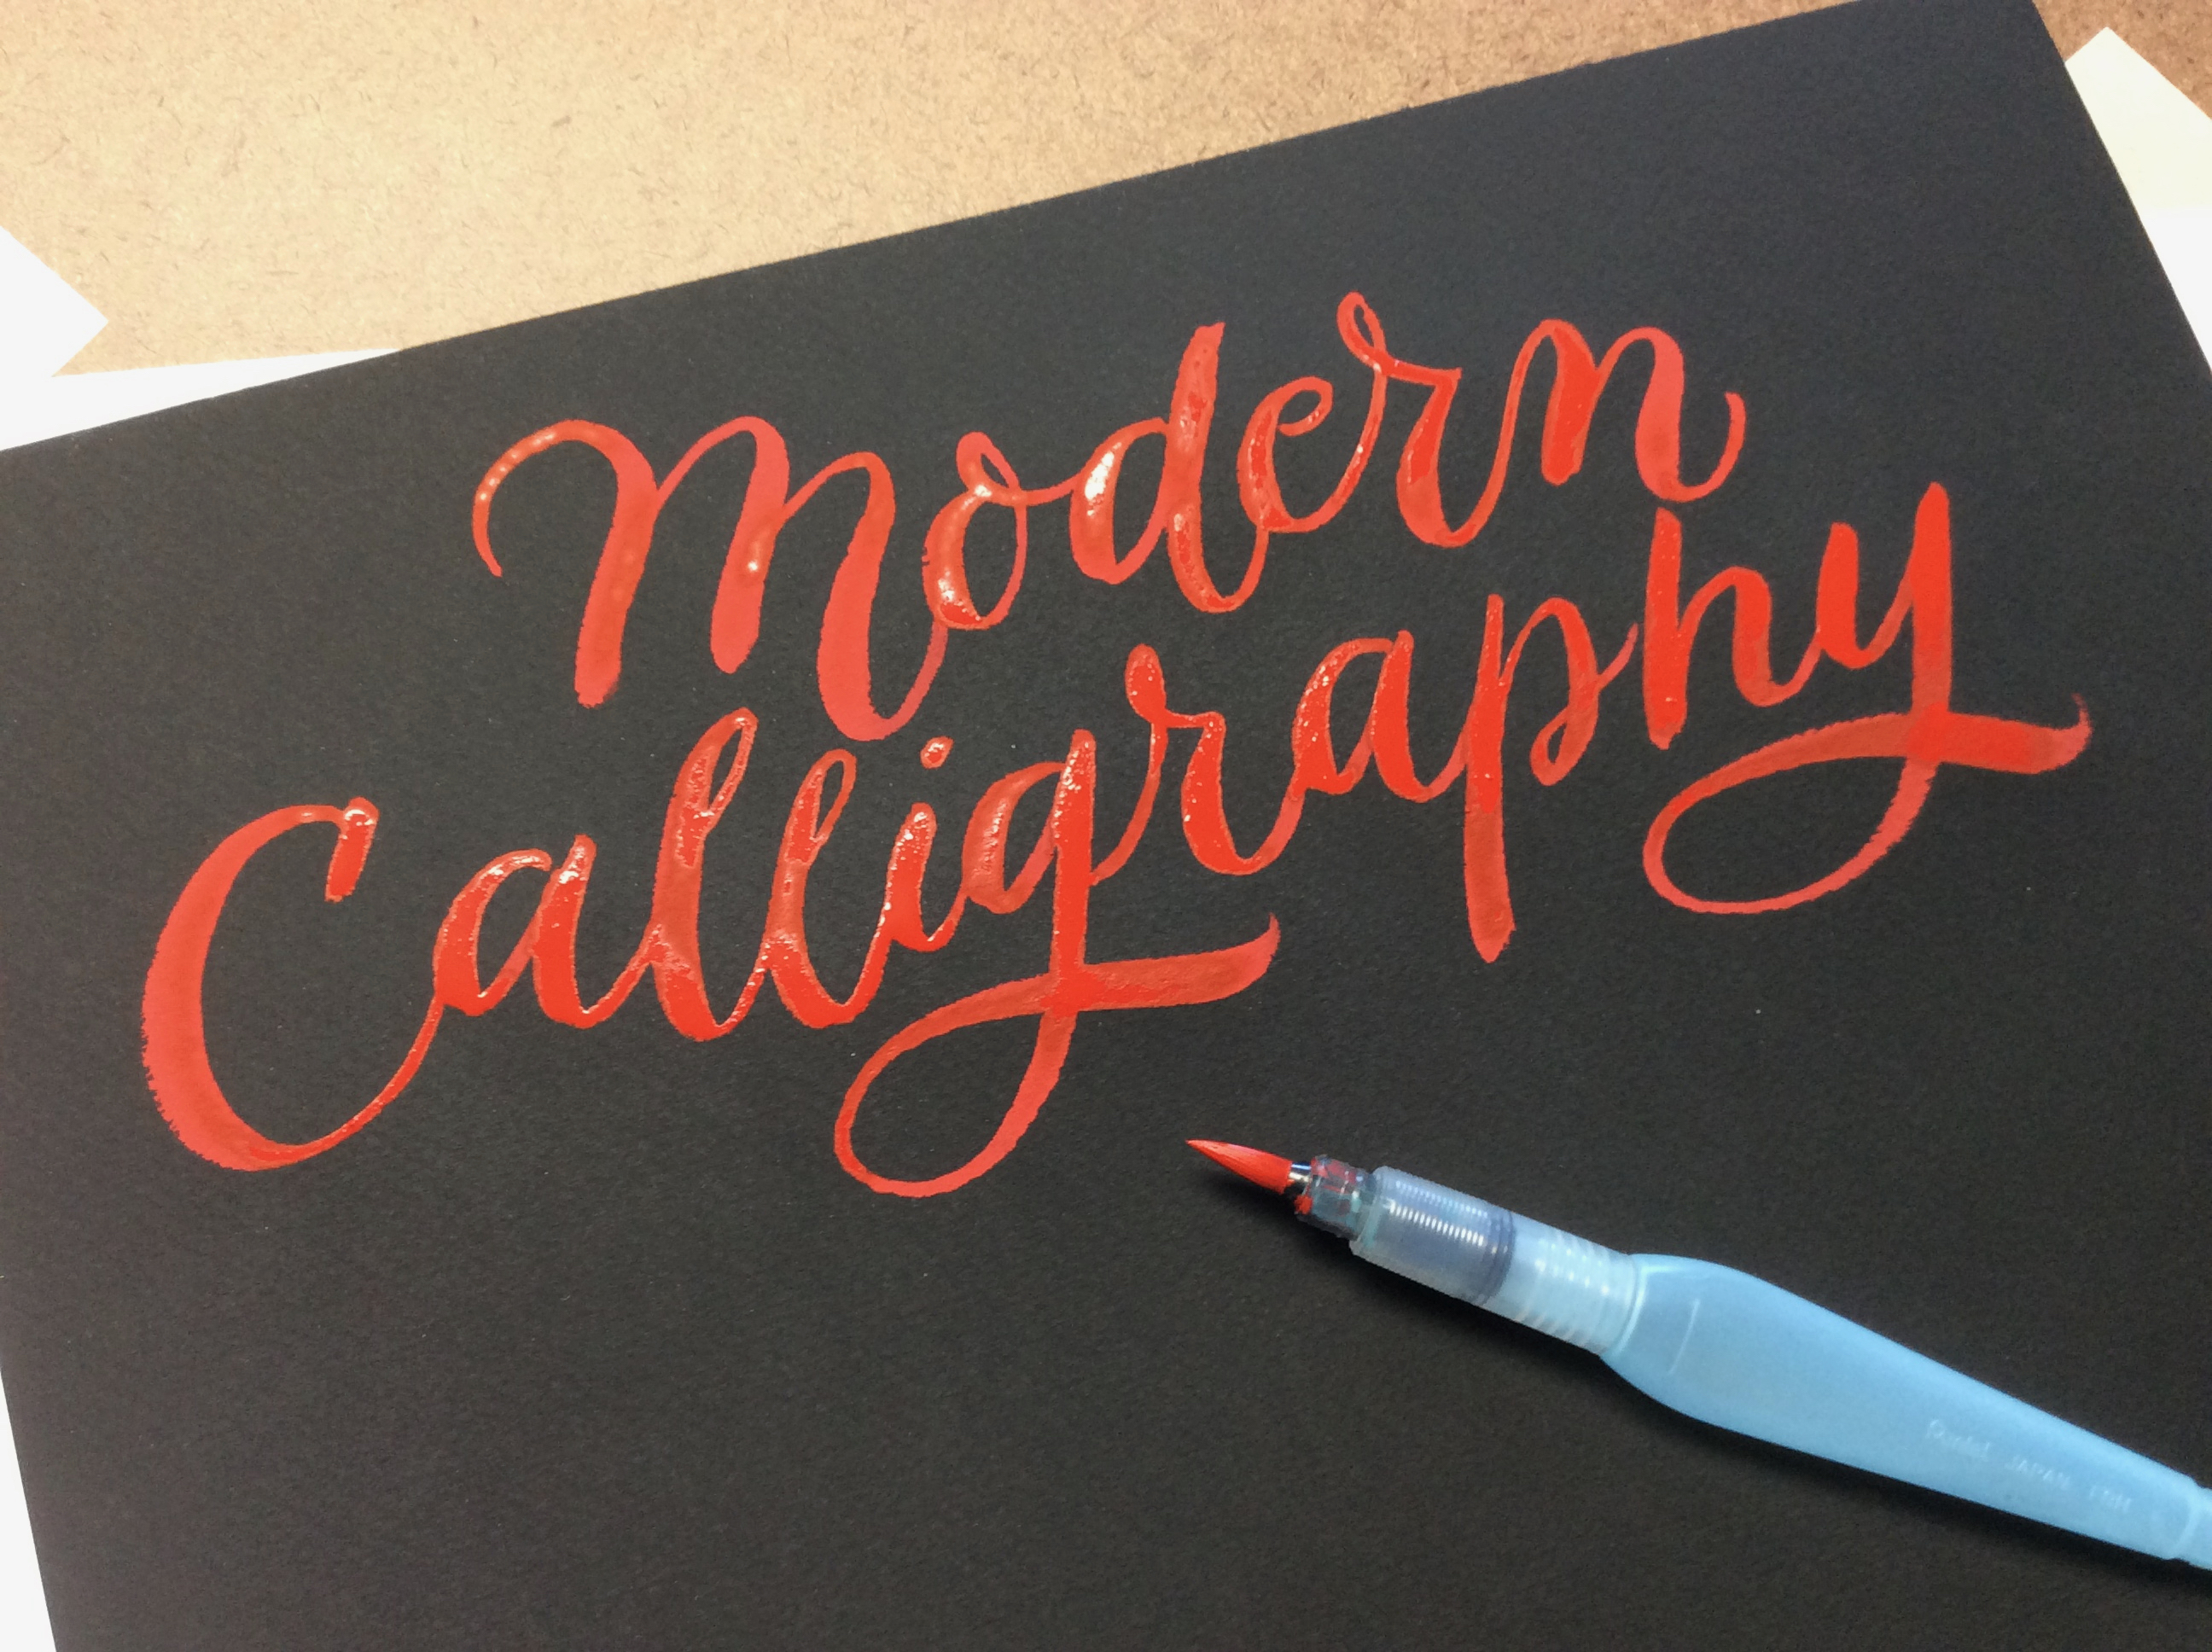 paper with text "modern calligraphy" and calligraphy brush